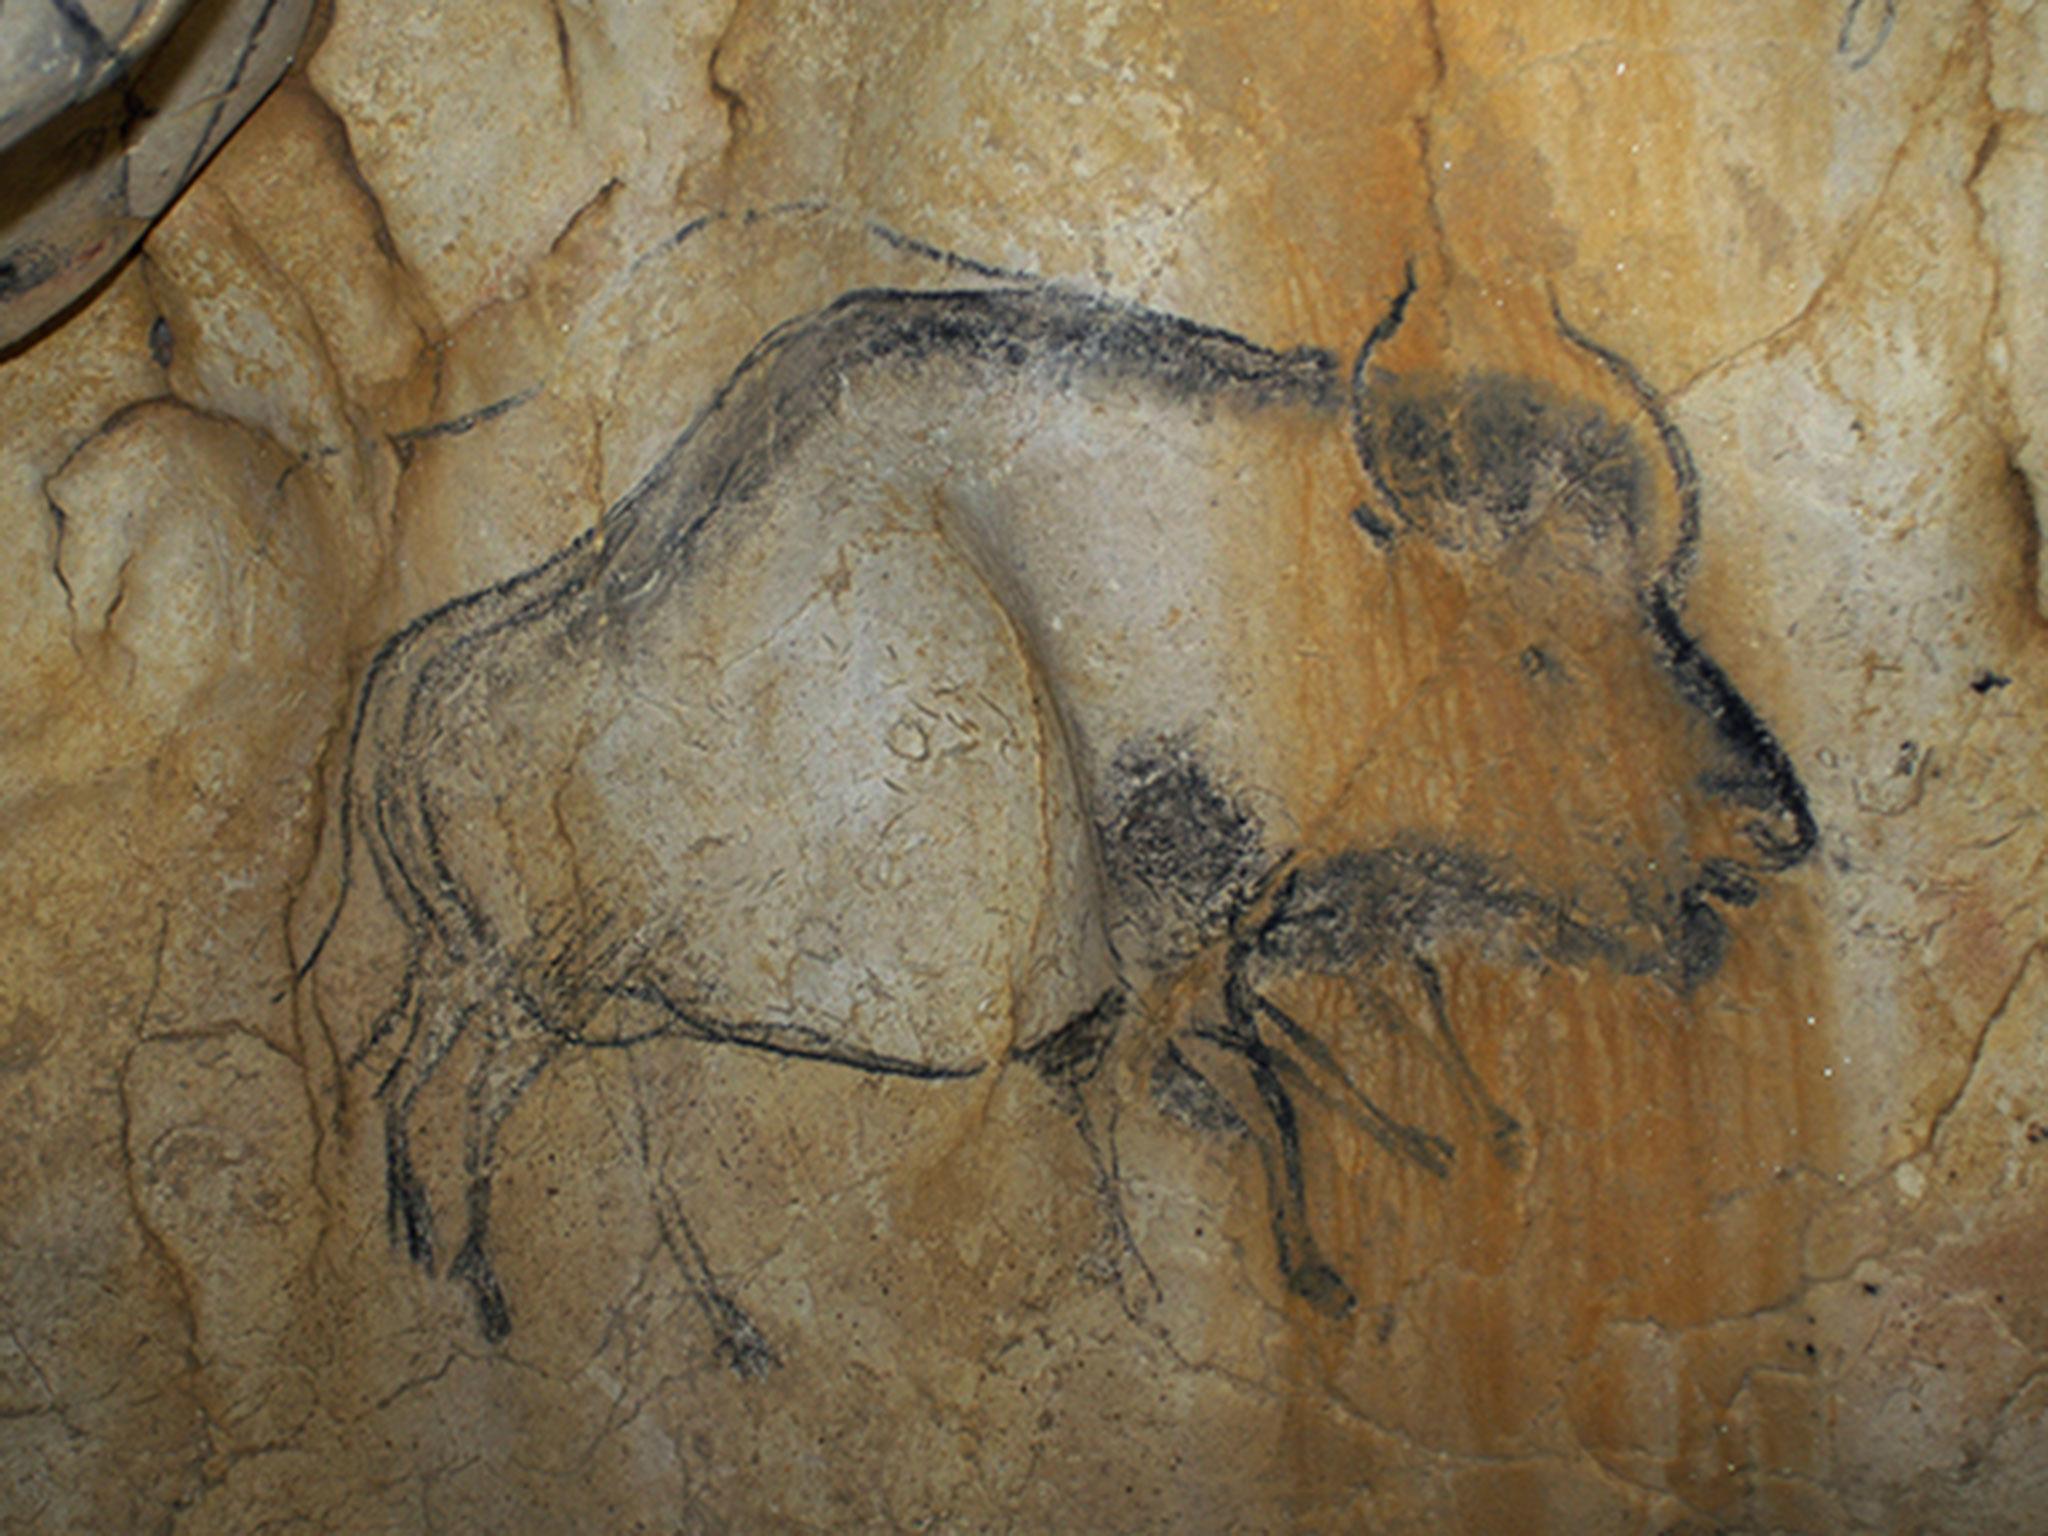 Prehistoric cave paintings help solve the mystery of how bison ended up